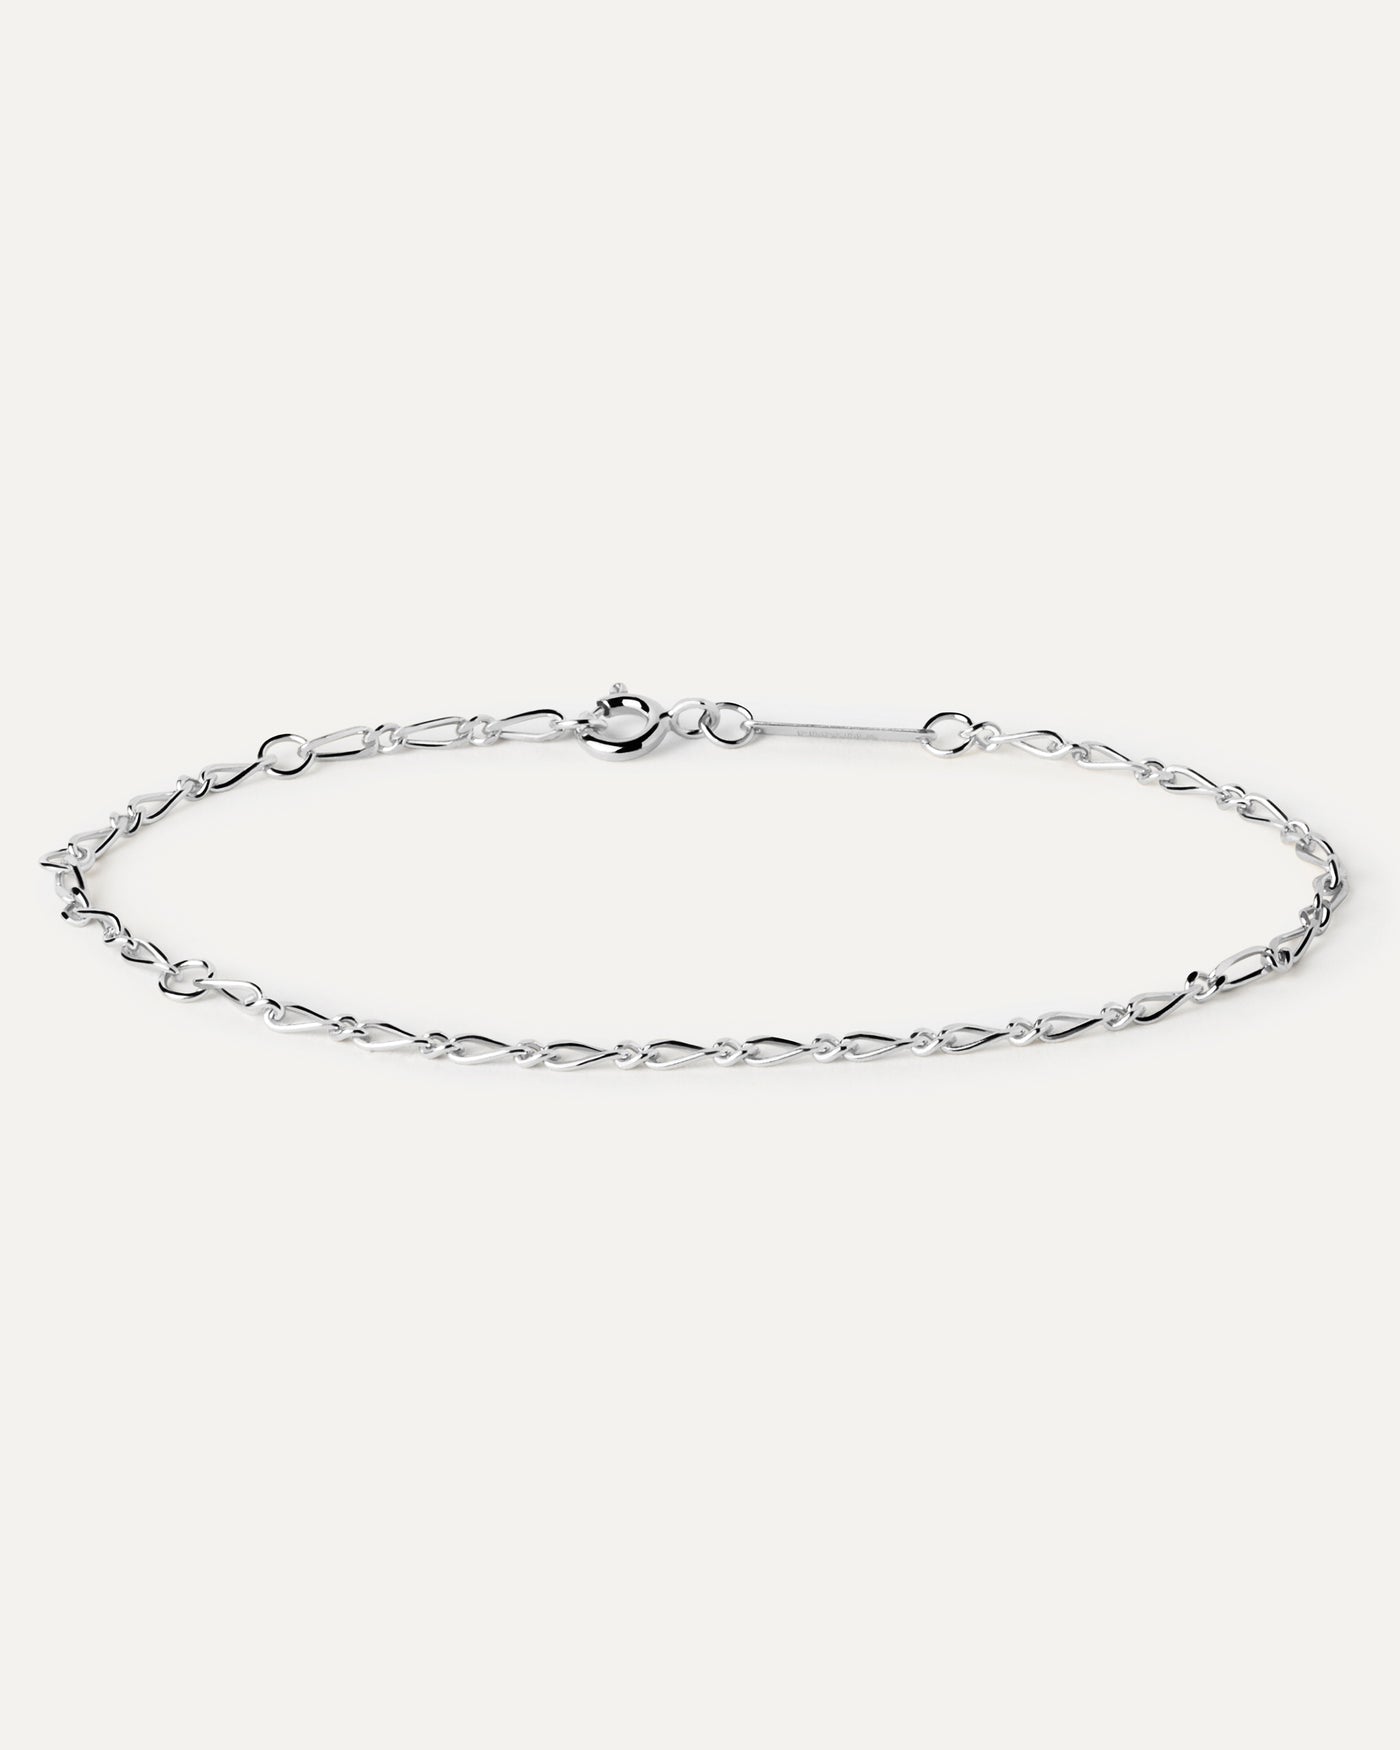 2023 Selection | Adele Silver Chain Bracelet. Sleek silver chain bracelet with intertwined asymmetric links. Get the latest arrival from PDPAOLA. Place your order safely and get this Best Seller. Free Shipping.